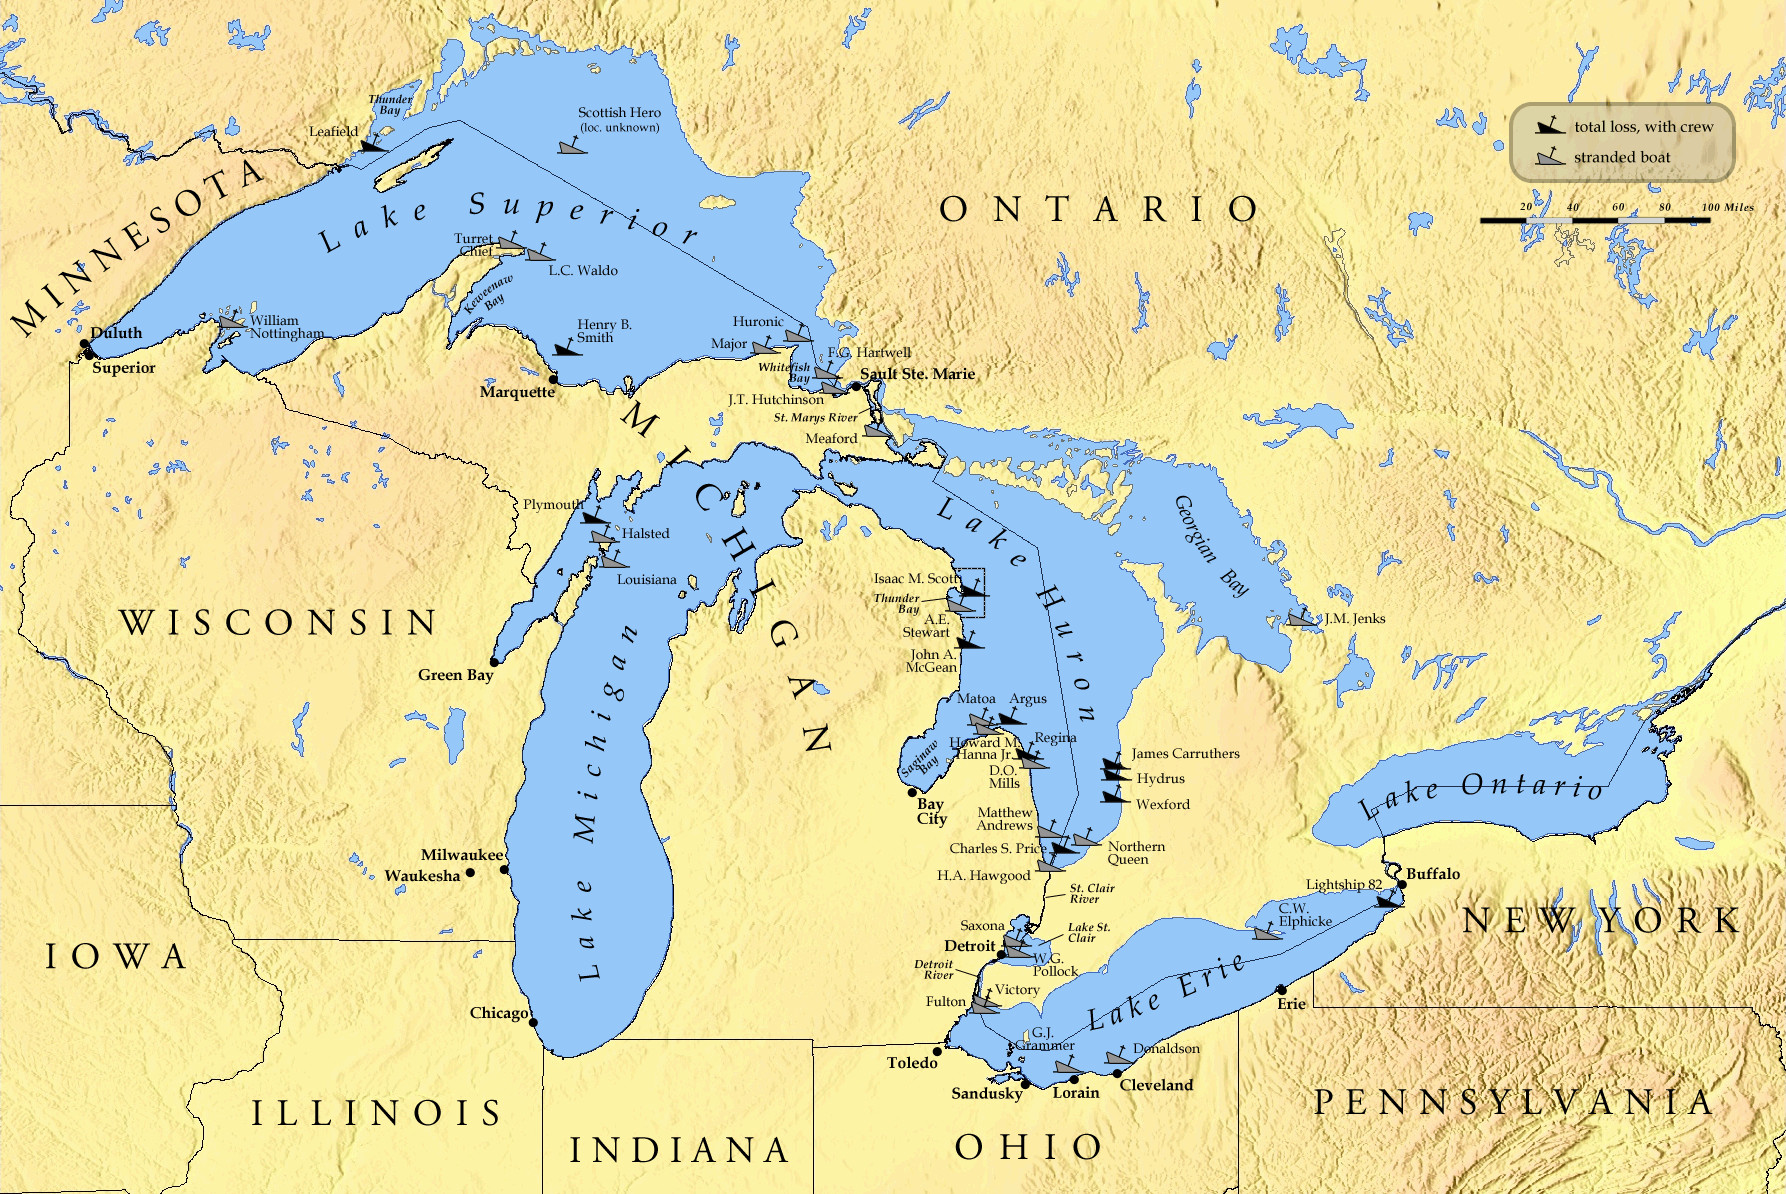 List of shipwrecks in the Great Lakes